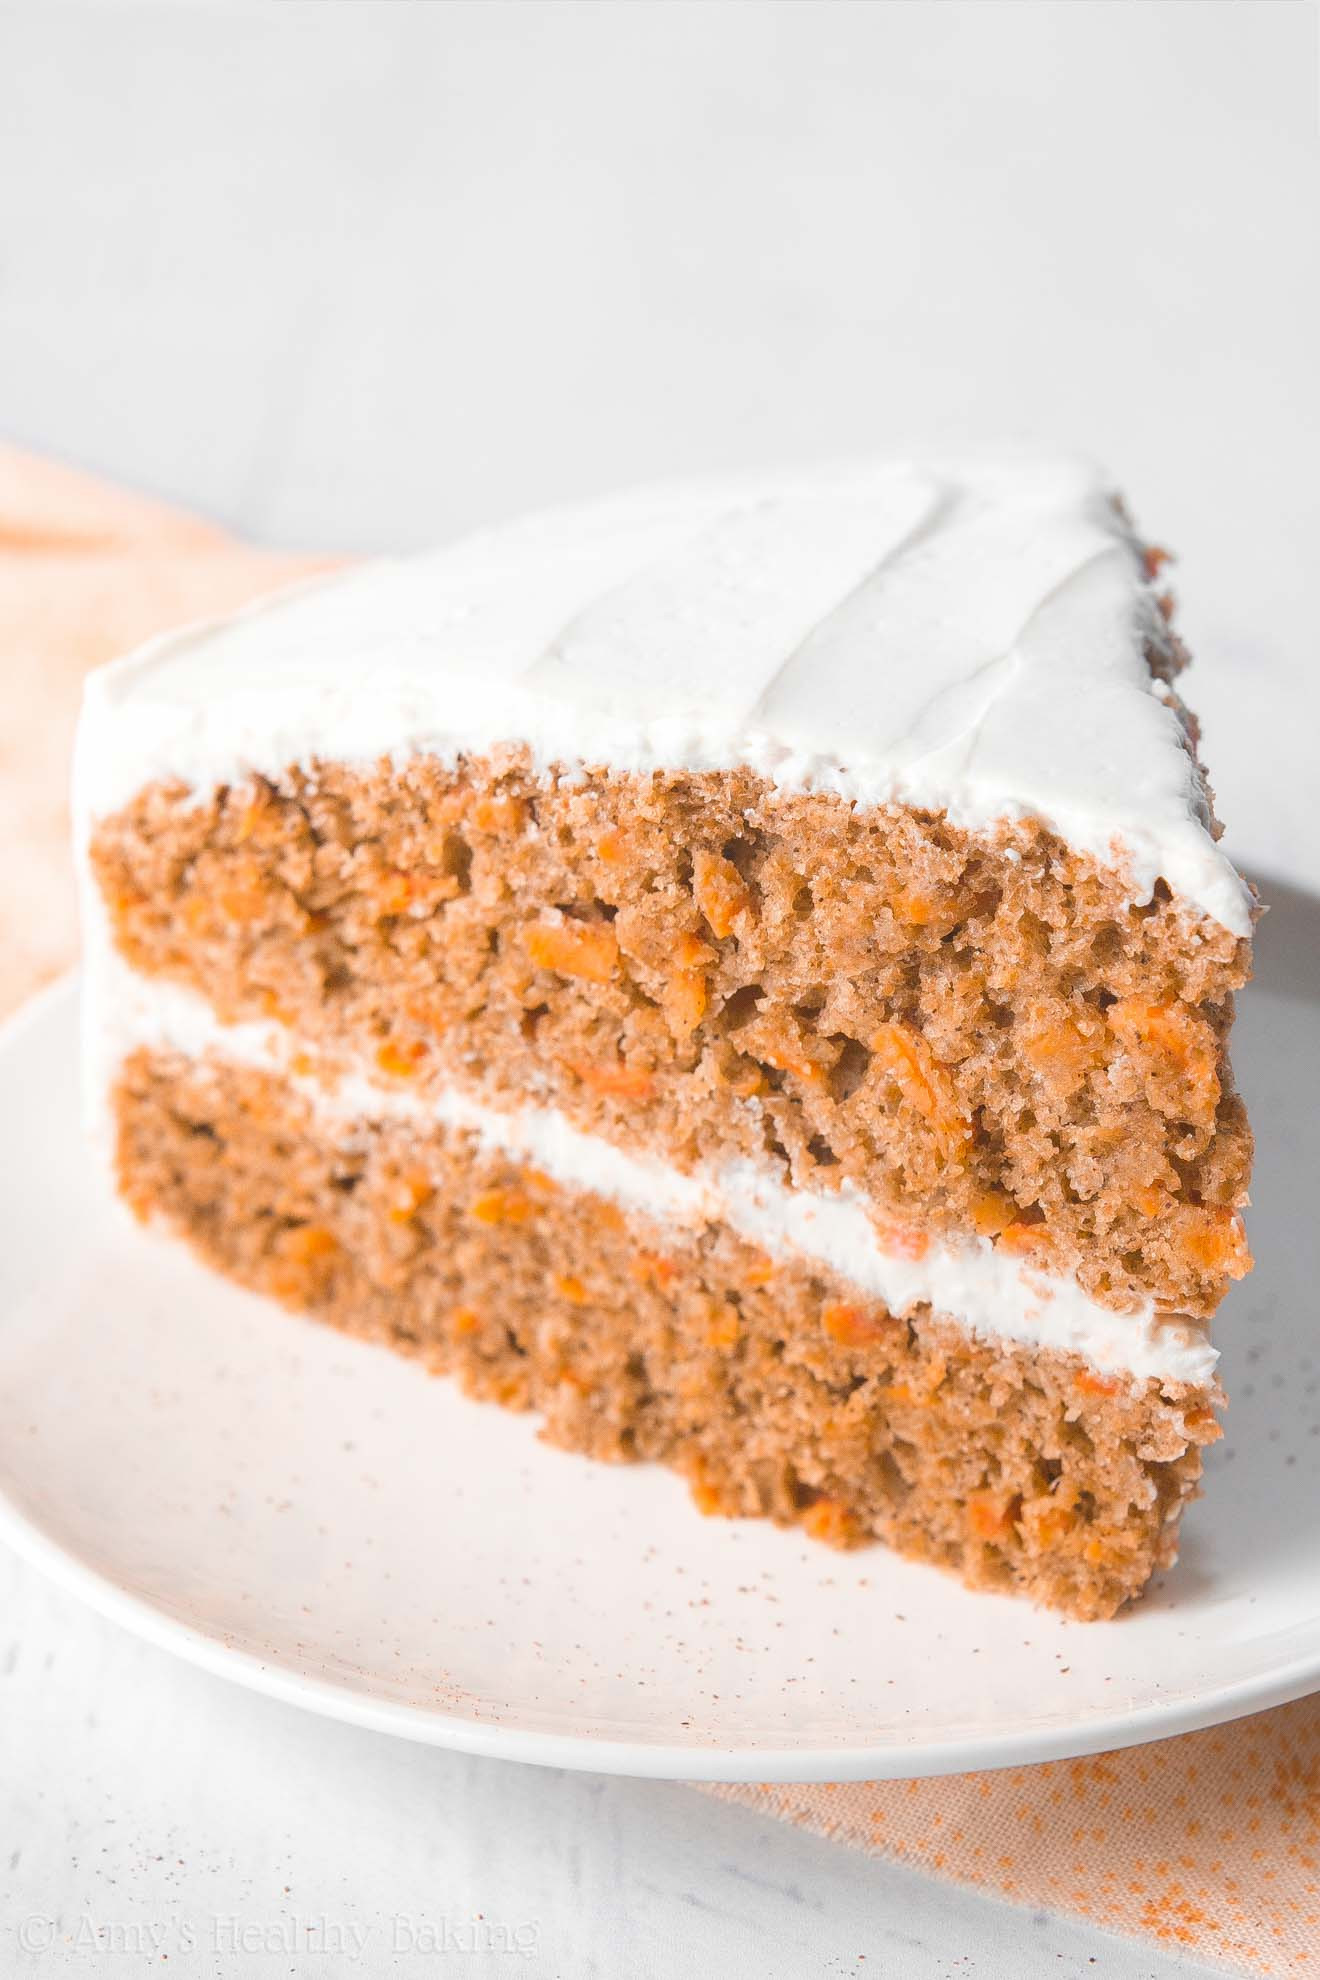 Healthy Cake Recipes
 The Ultimate Healthy Carrot Cake